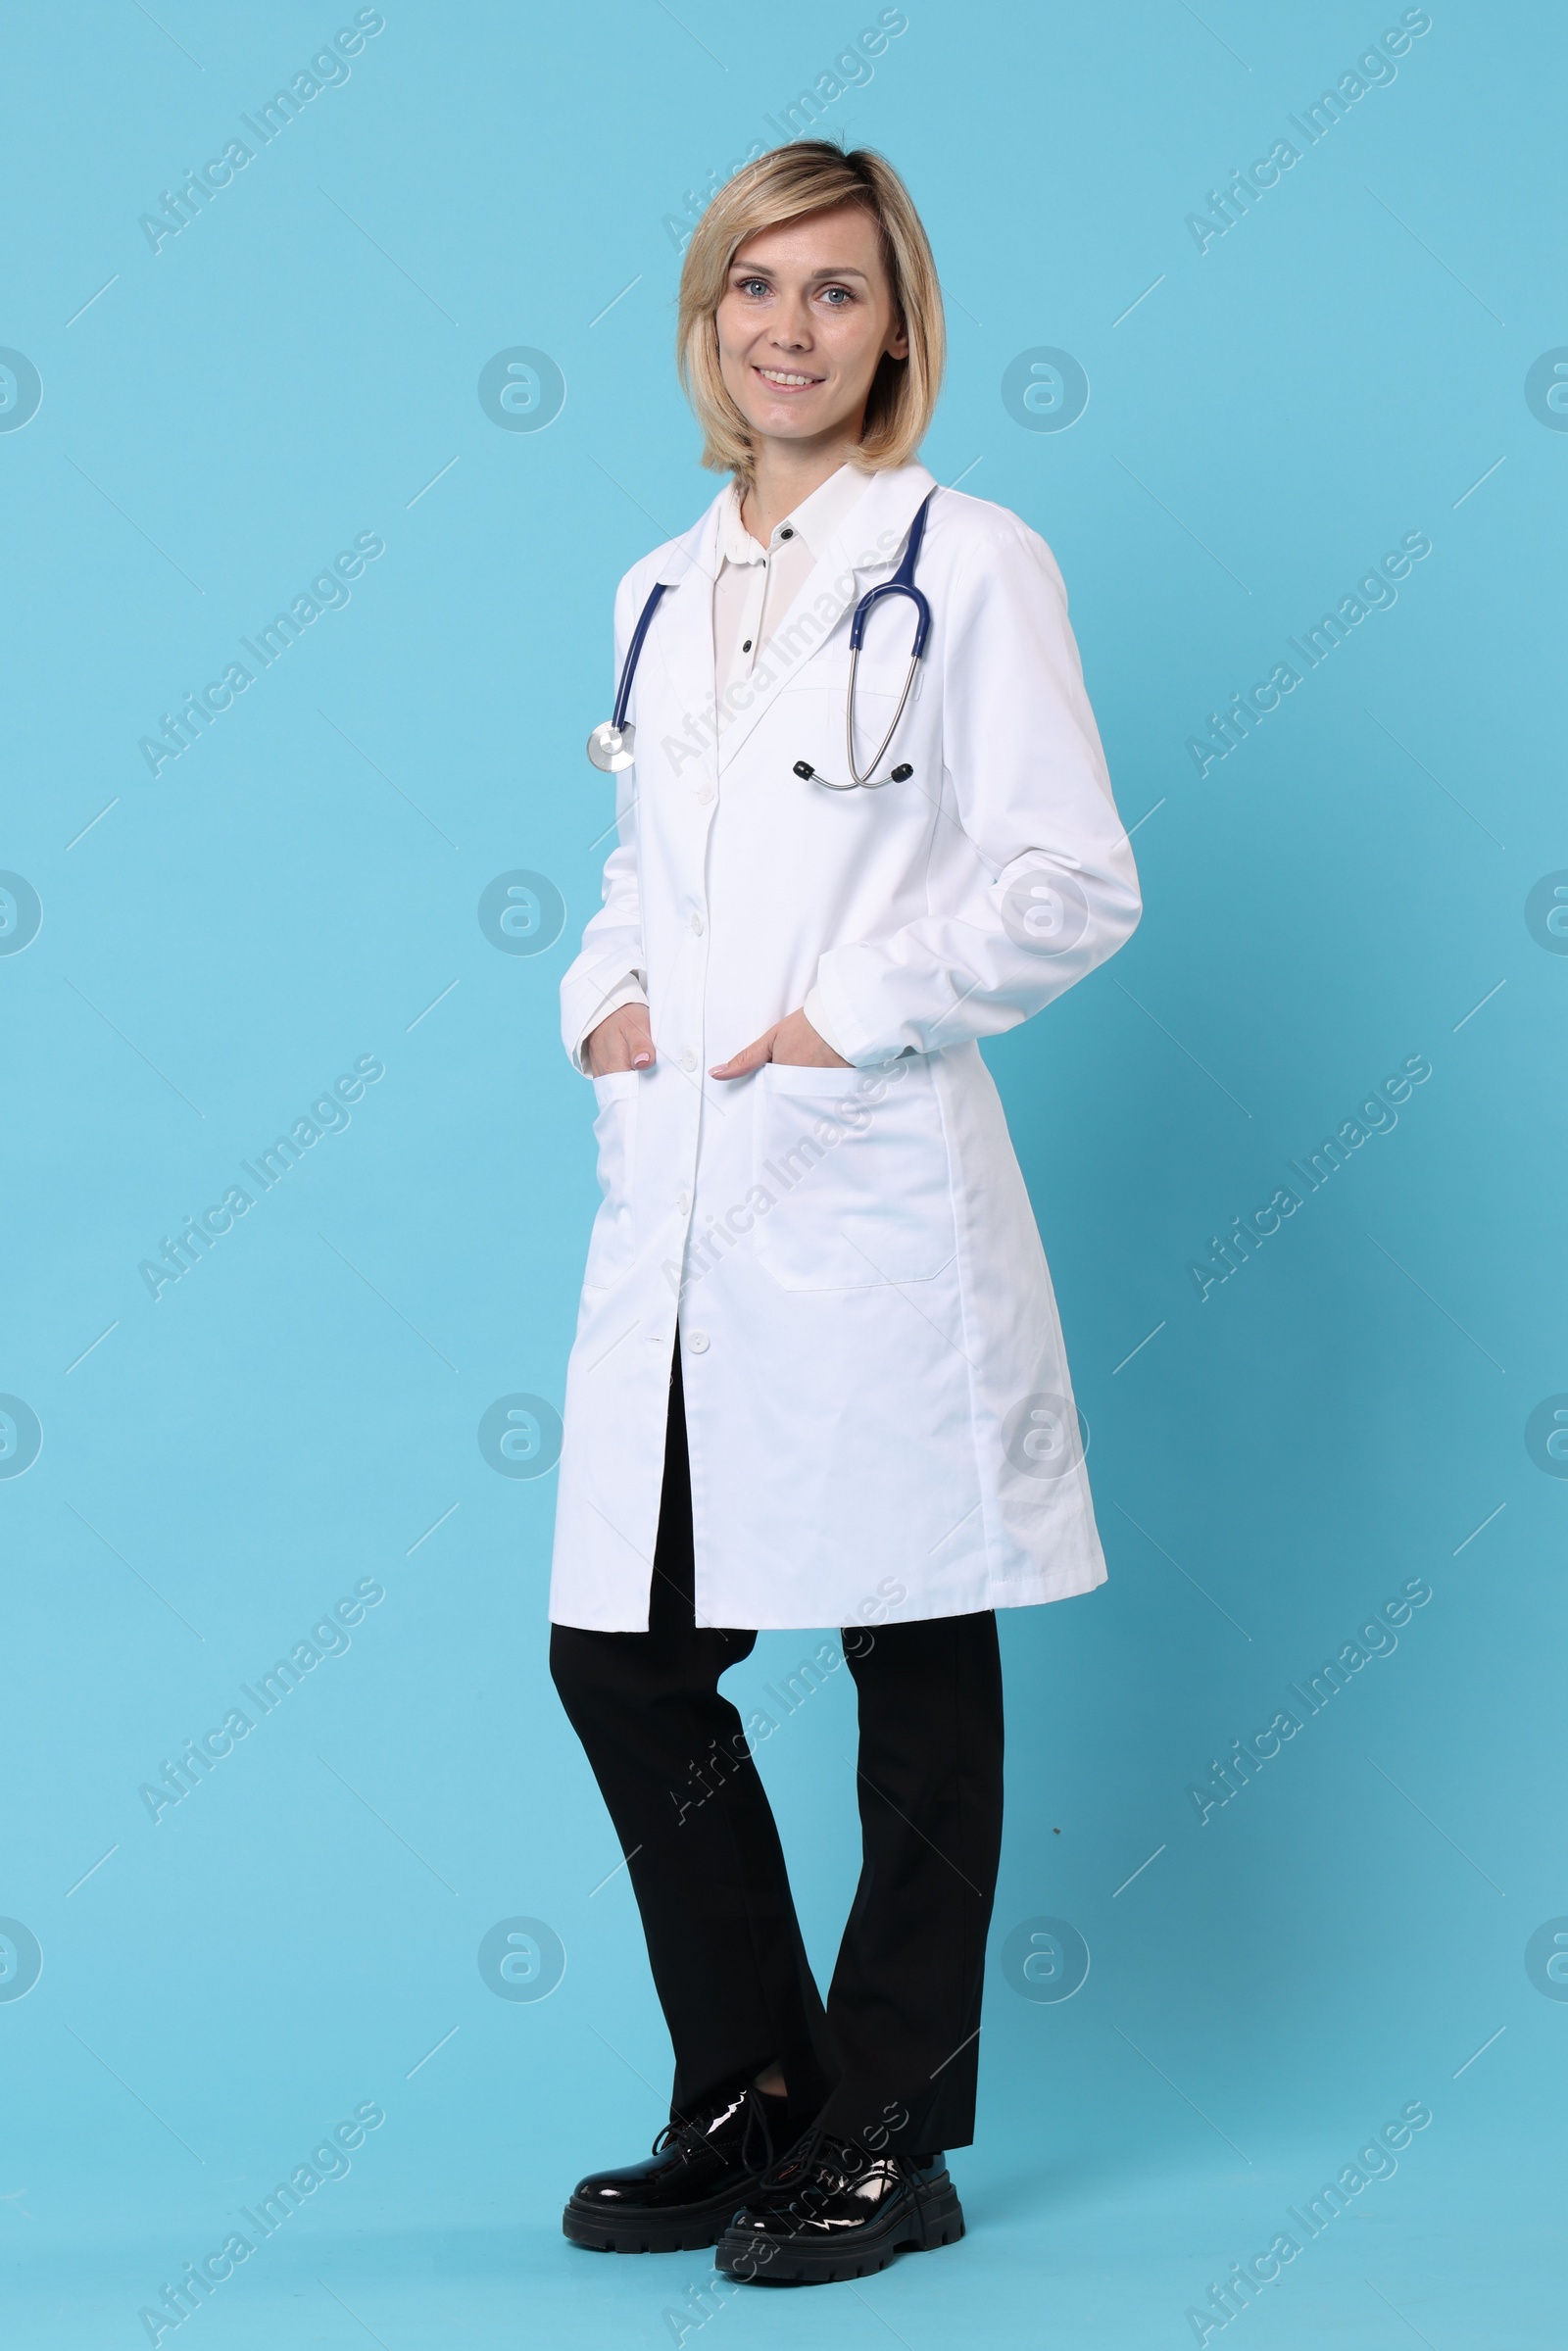 Photo of Smiling doctor in uniform on light blue background